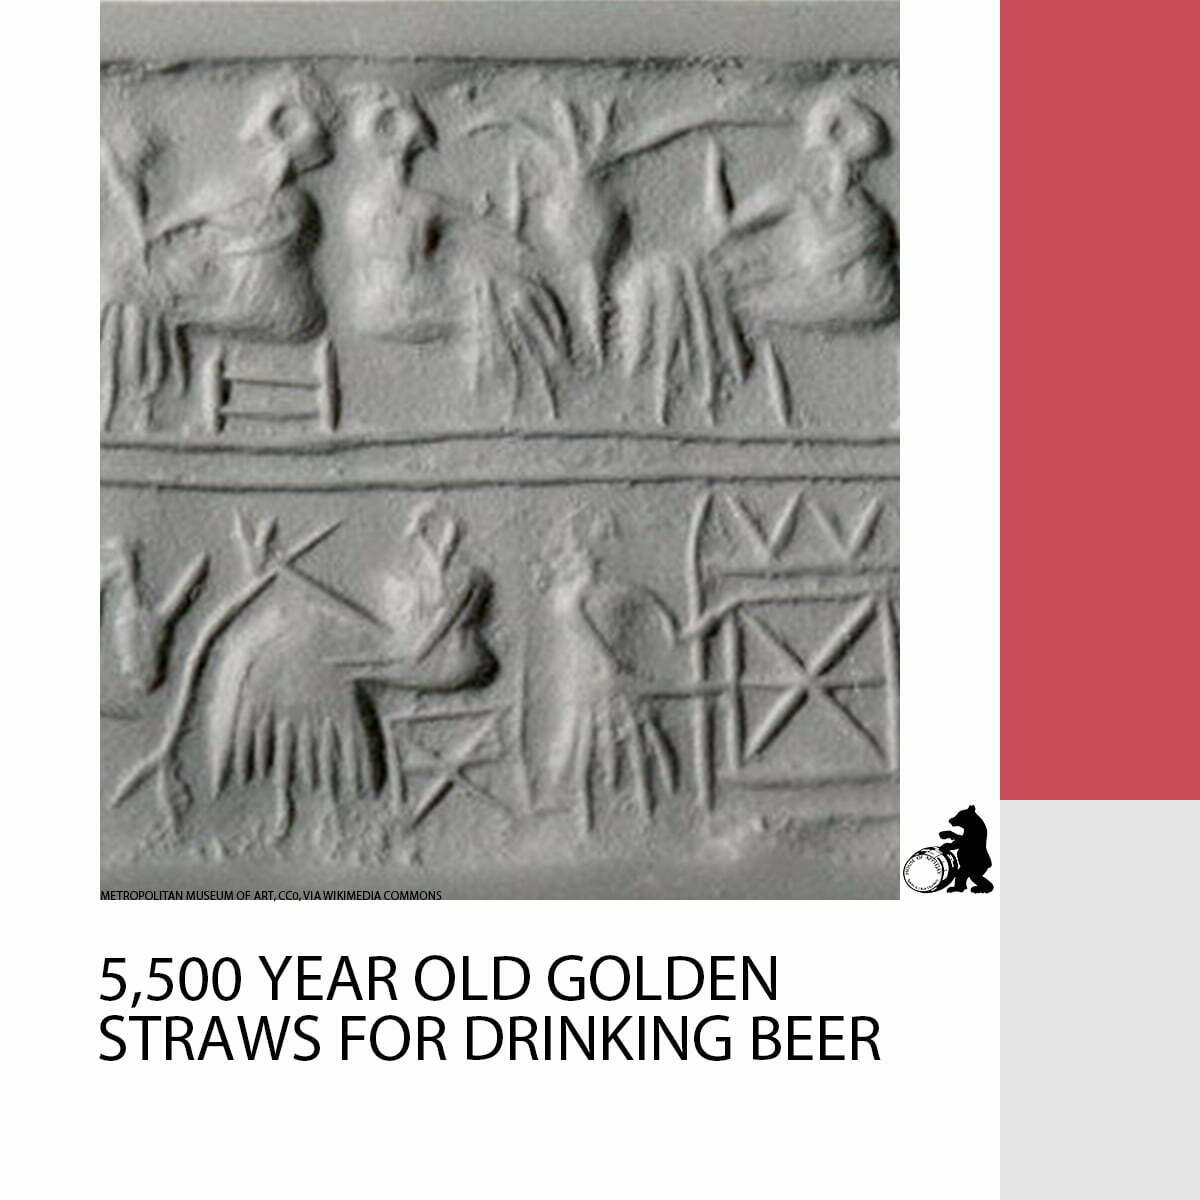 The First Golden Straw